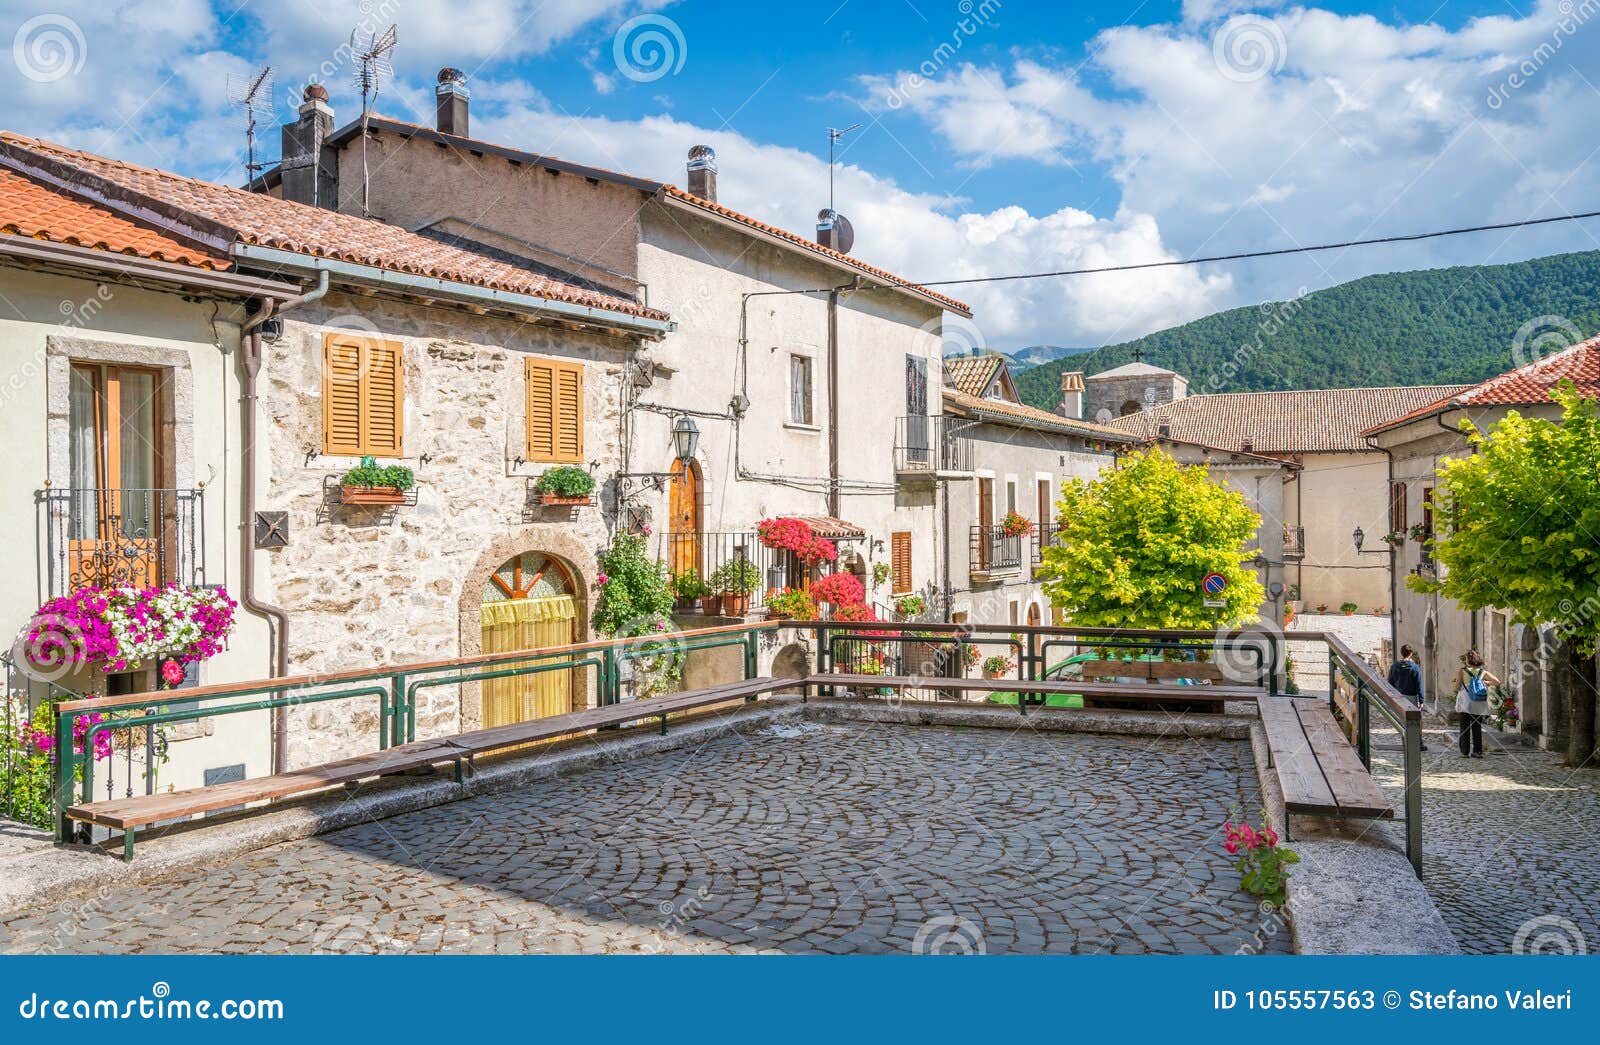 opi in a summer afternoon, rural village in abruzzo national park, province of l`aquila, italy.